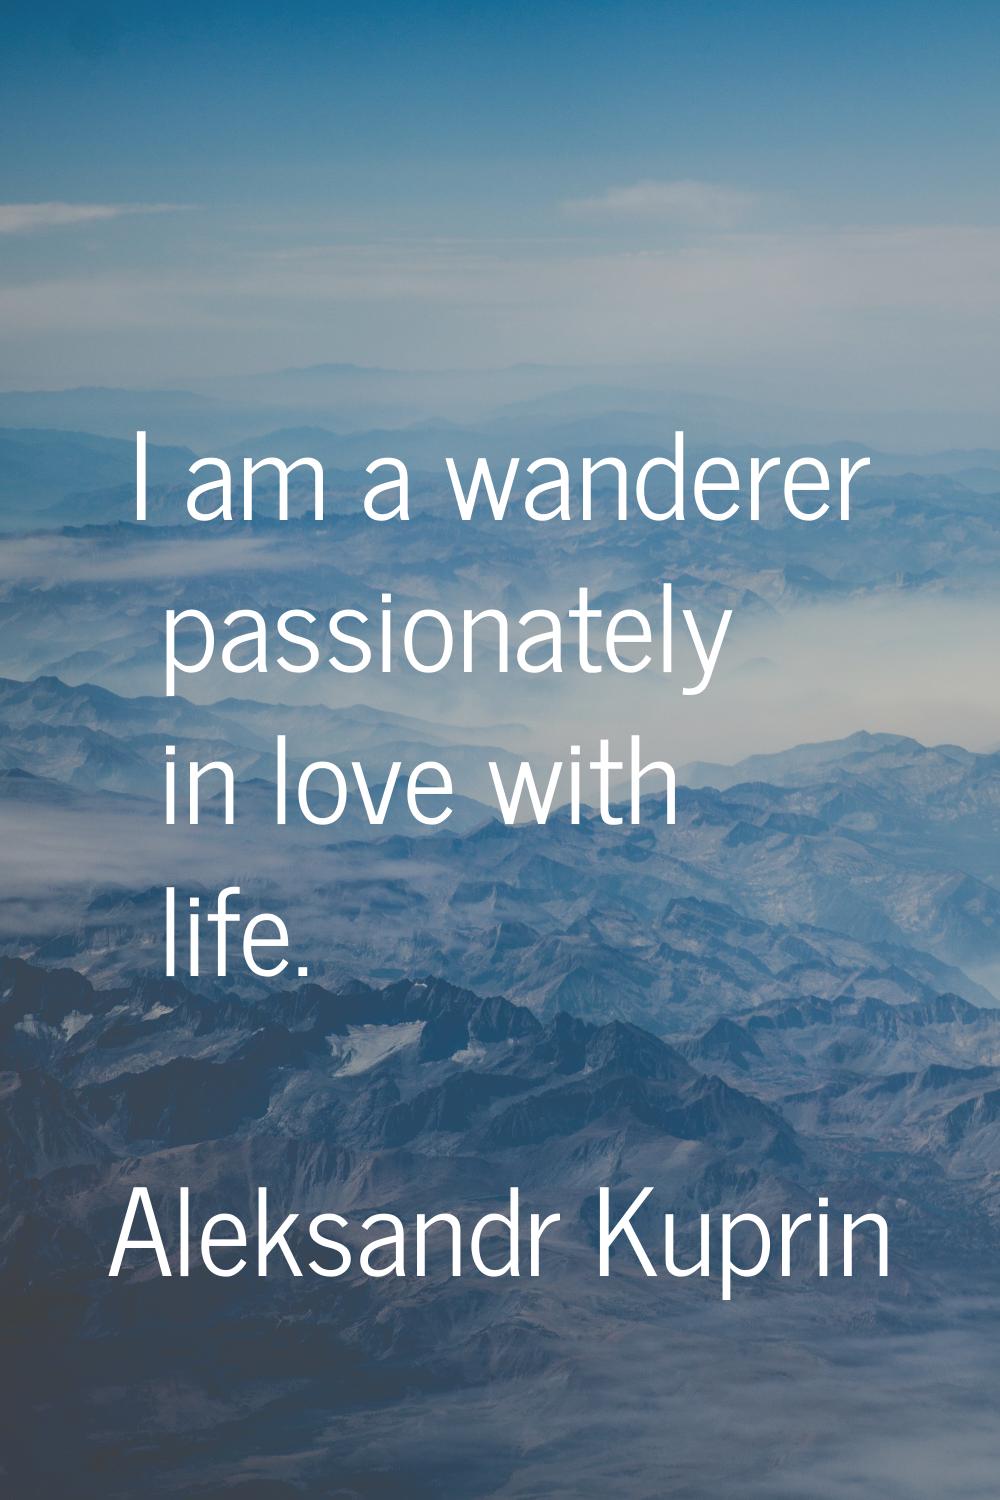 I am a wanderer passionately in love with life.